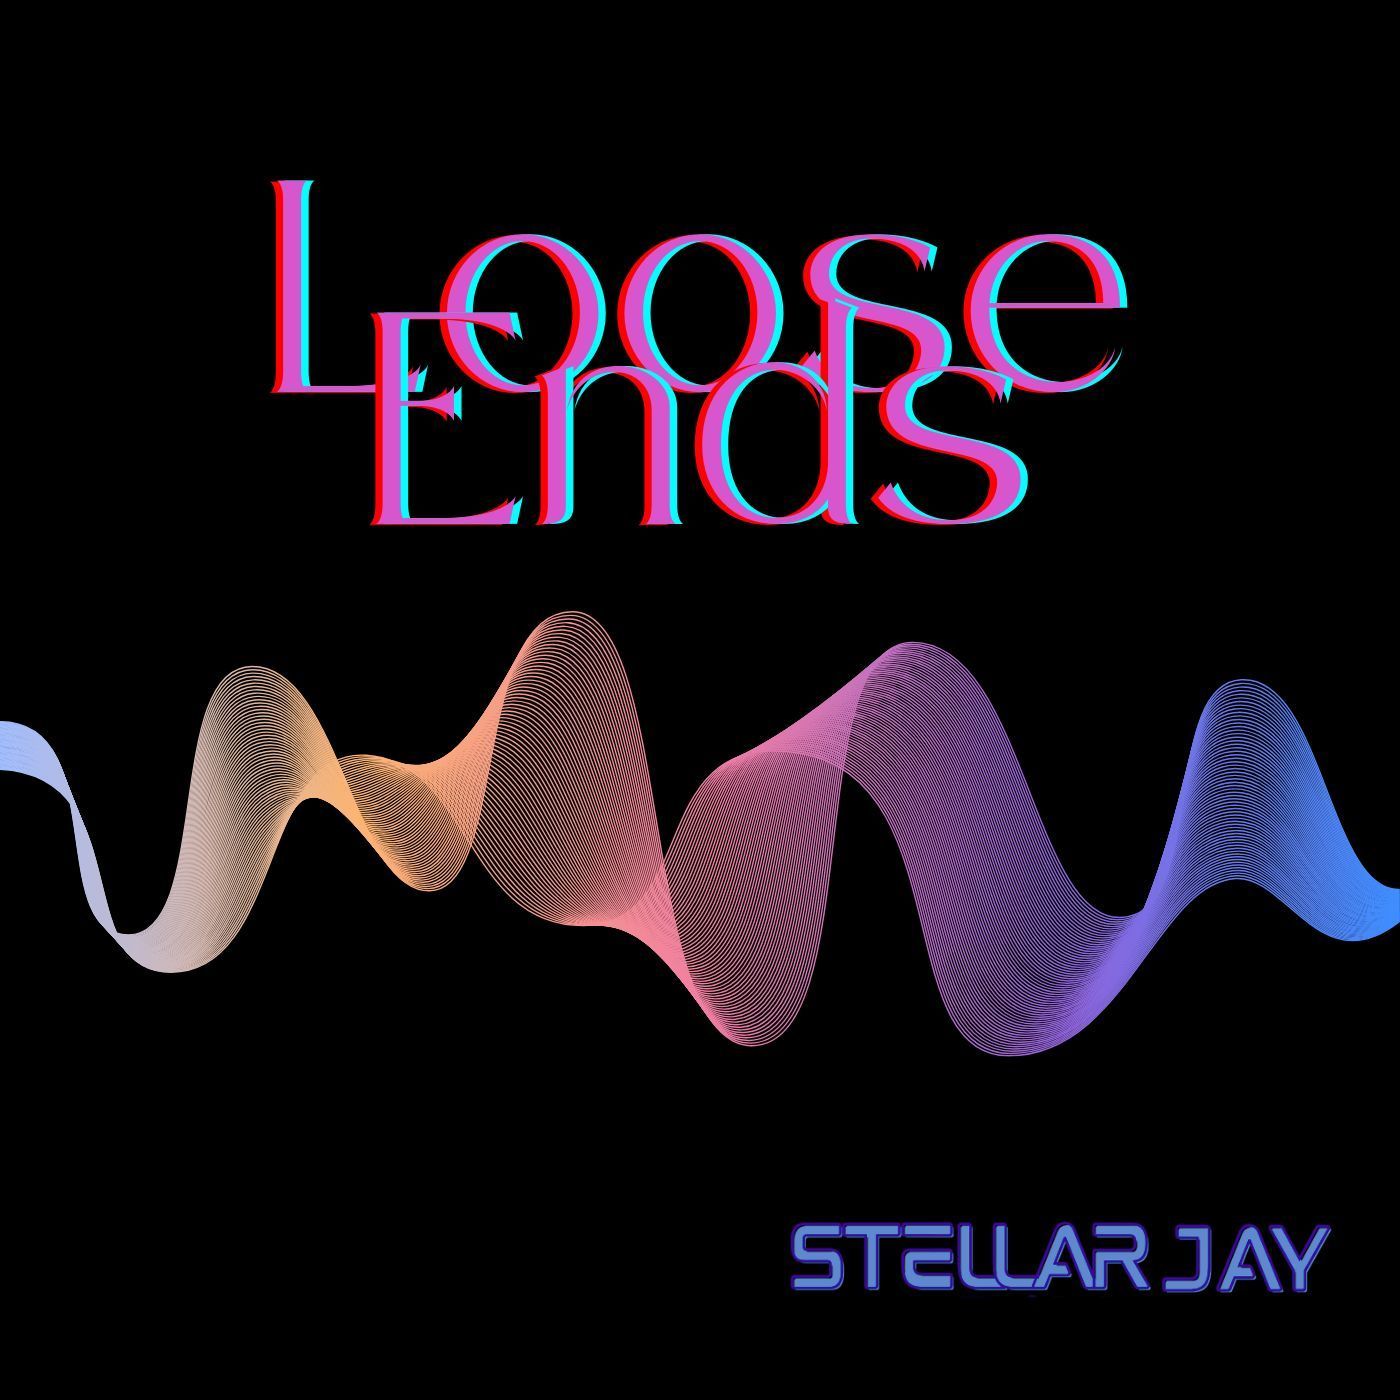 the cover of loose ends by stellar jay